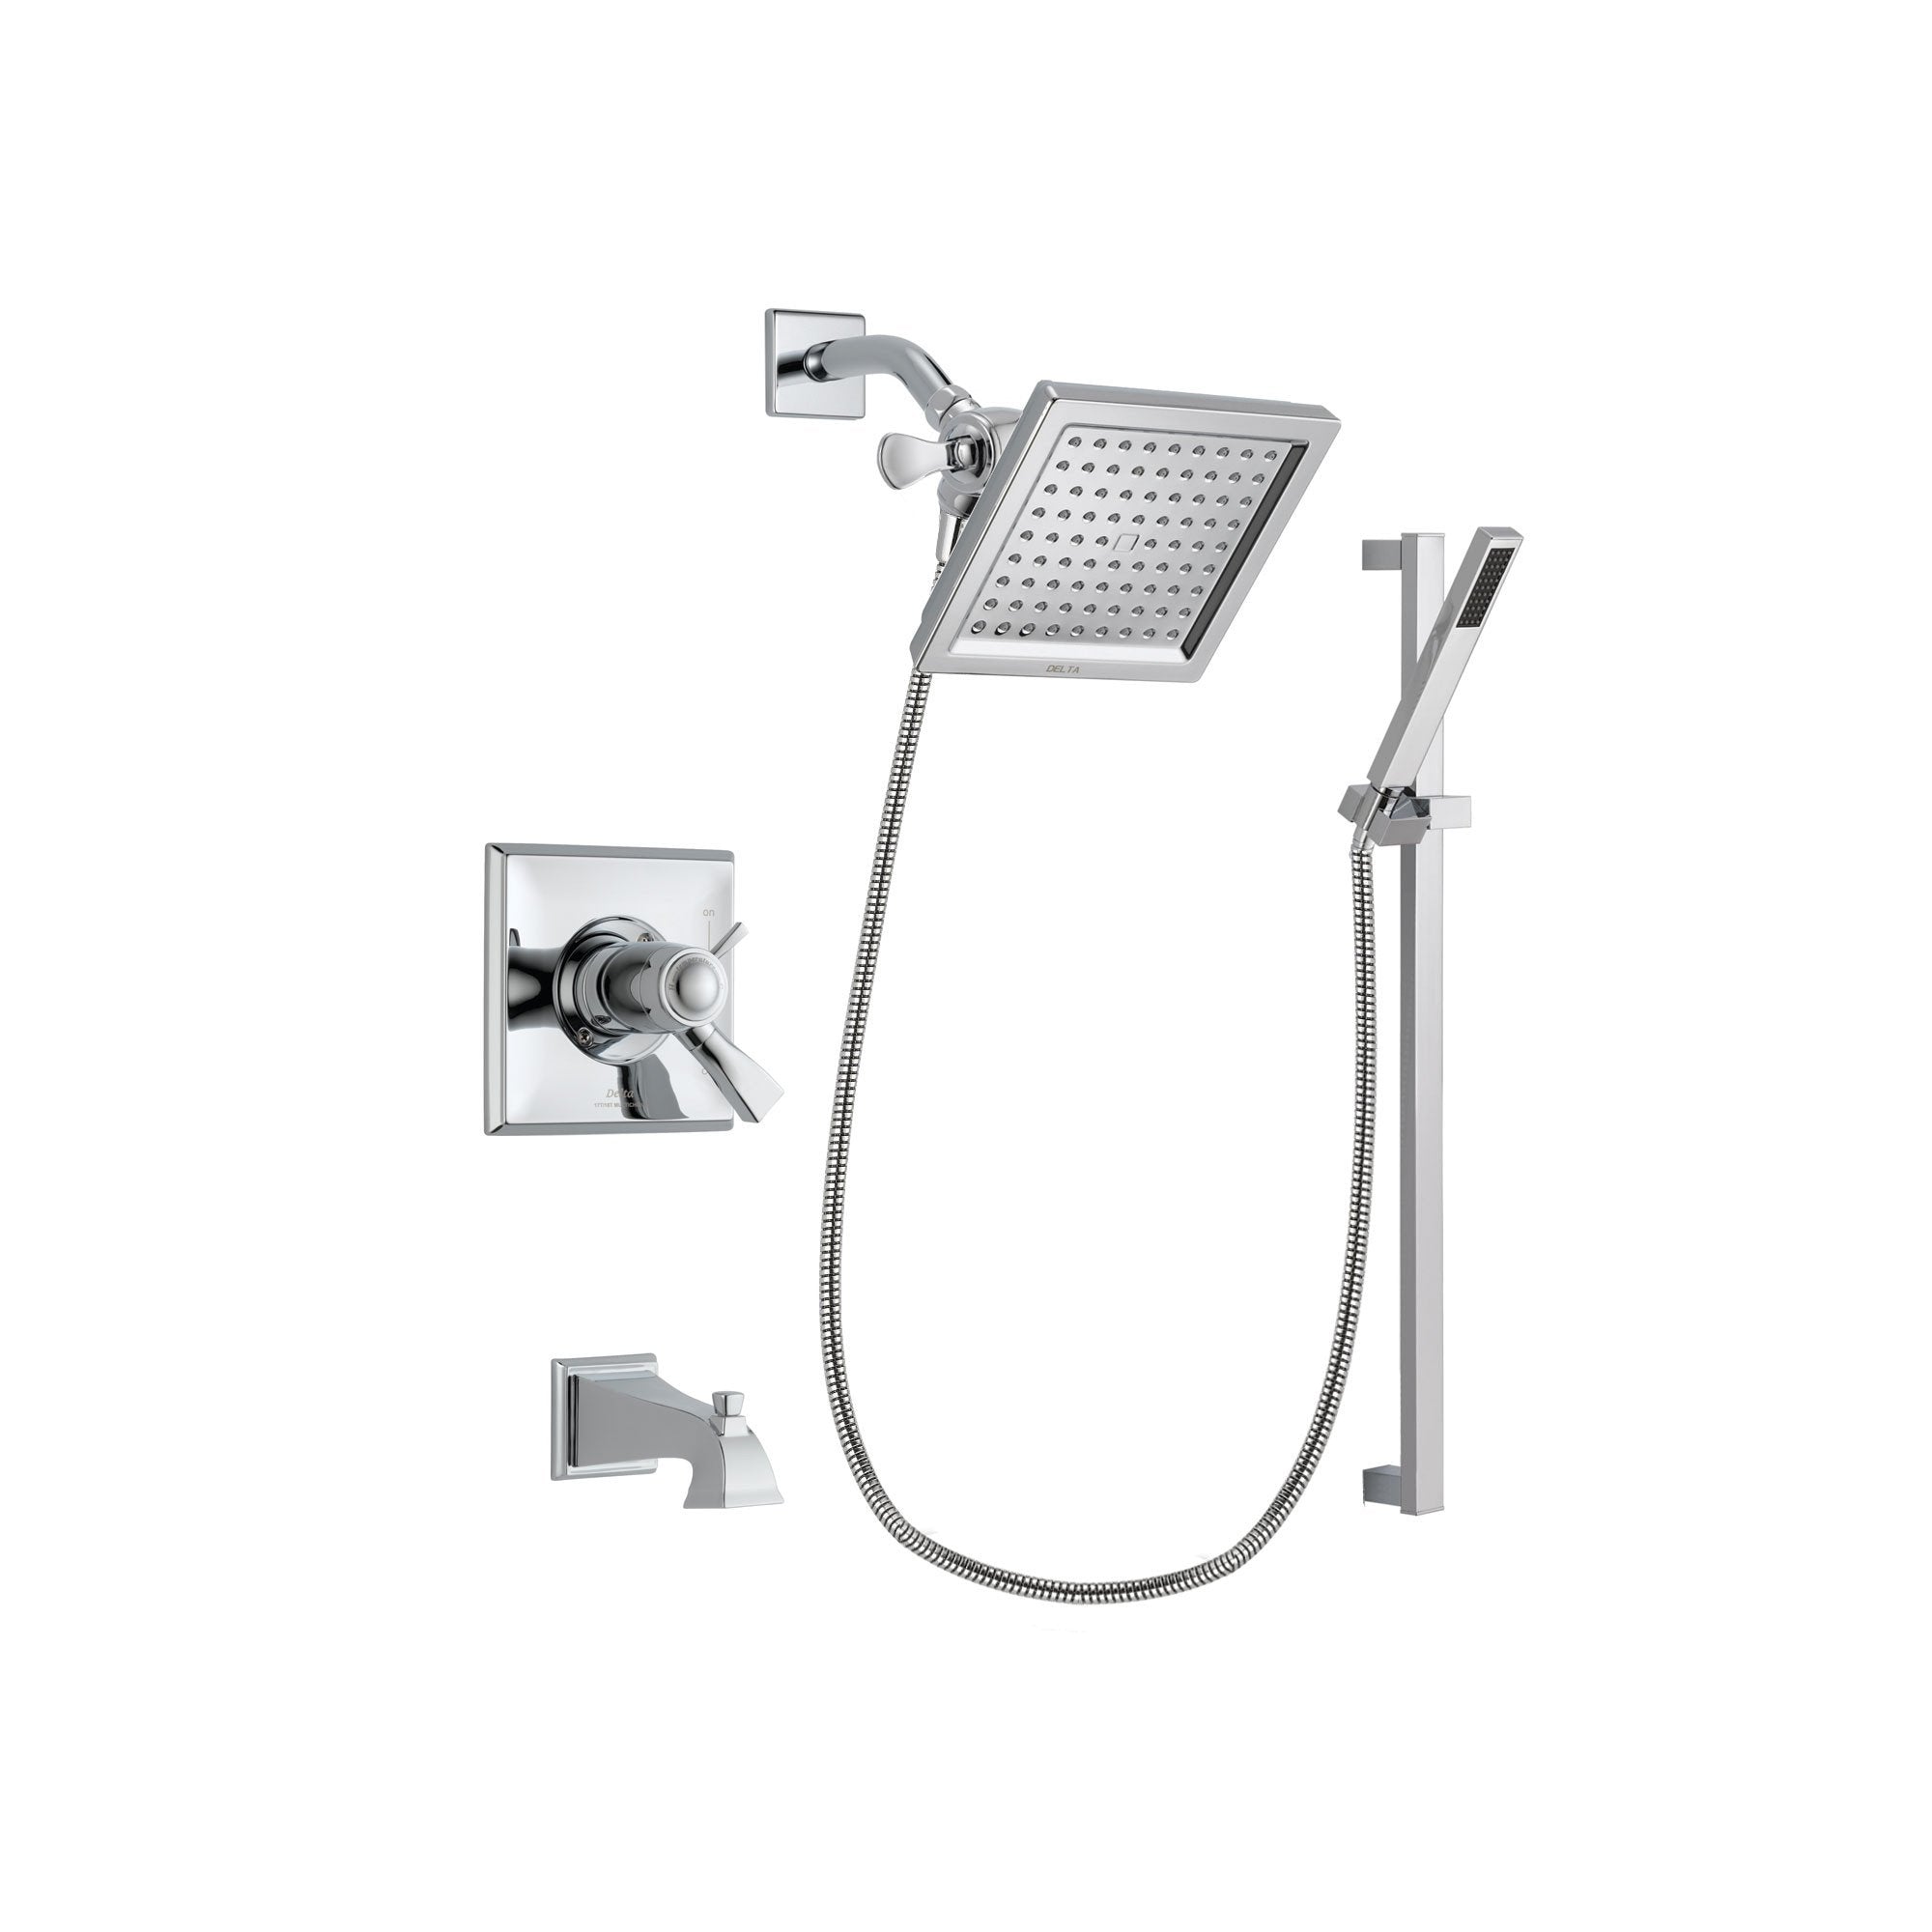 Delta Dryden Chrome Finish Thermostatic Tub and Shower Faucet System Package with 6.5-inch Square Rain Showerhead and Modern Square Wall Mount Slide Bar with Handheld Shower Spray Includes Rough-in Valve and Tub Spout DSP0210V